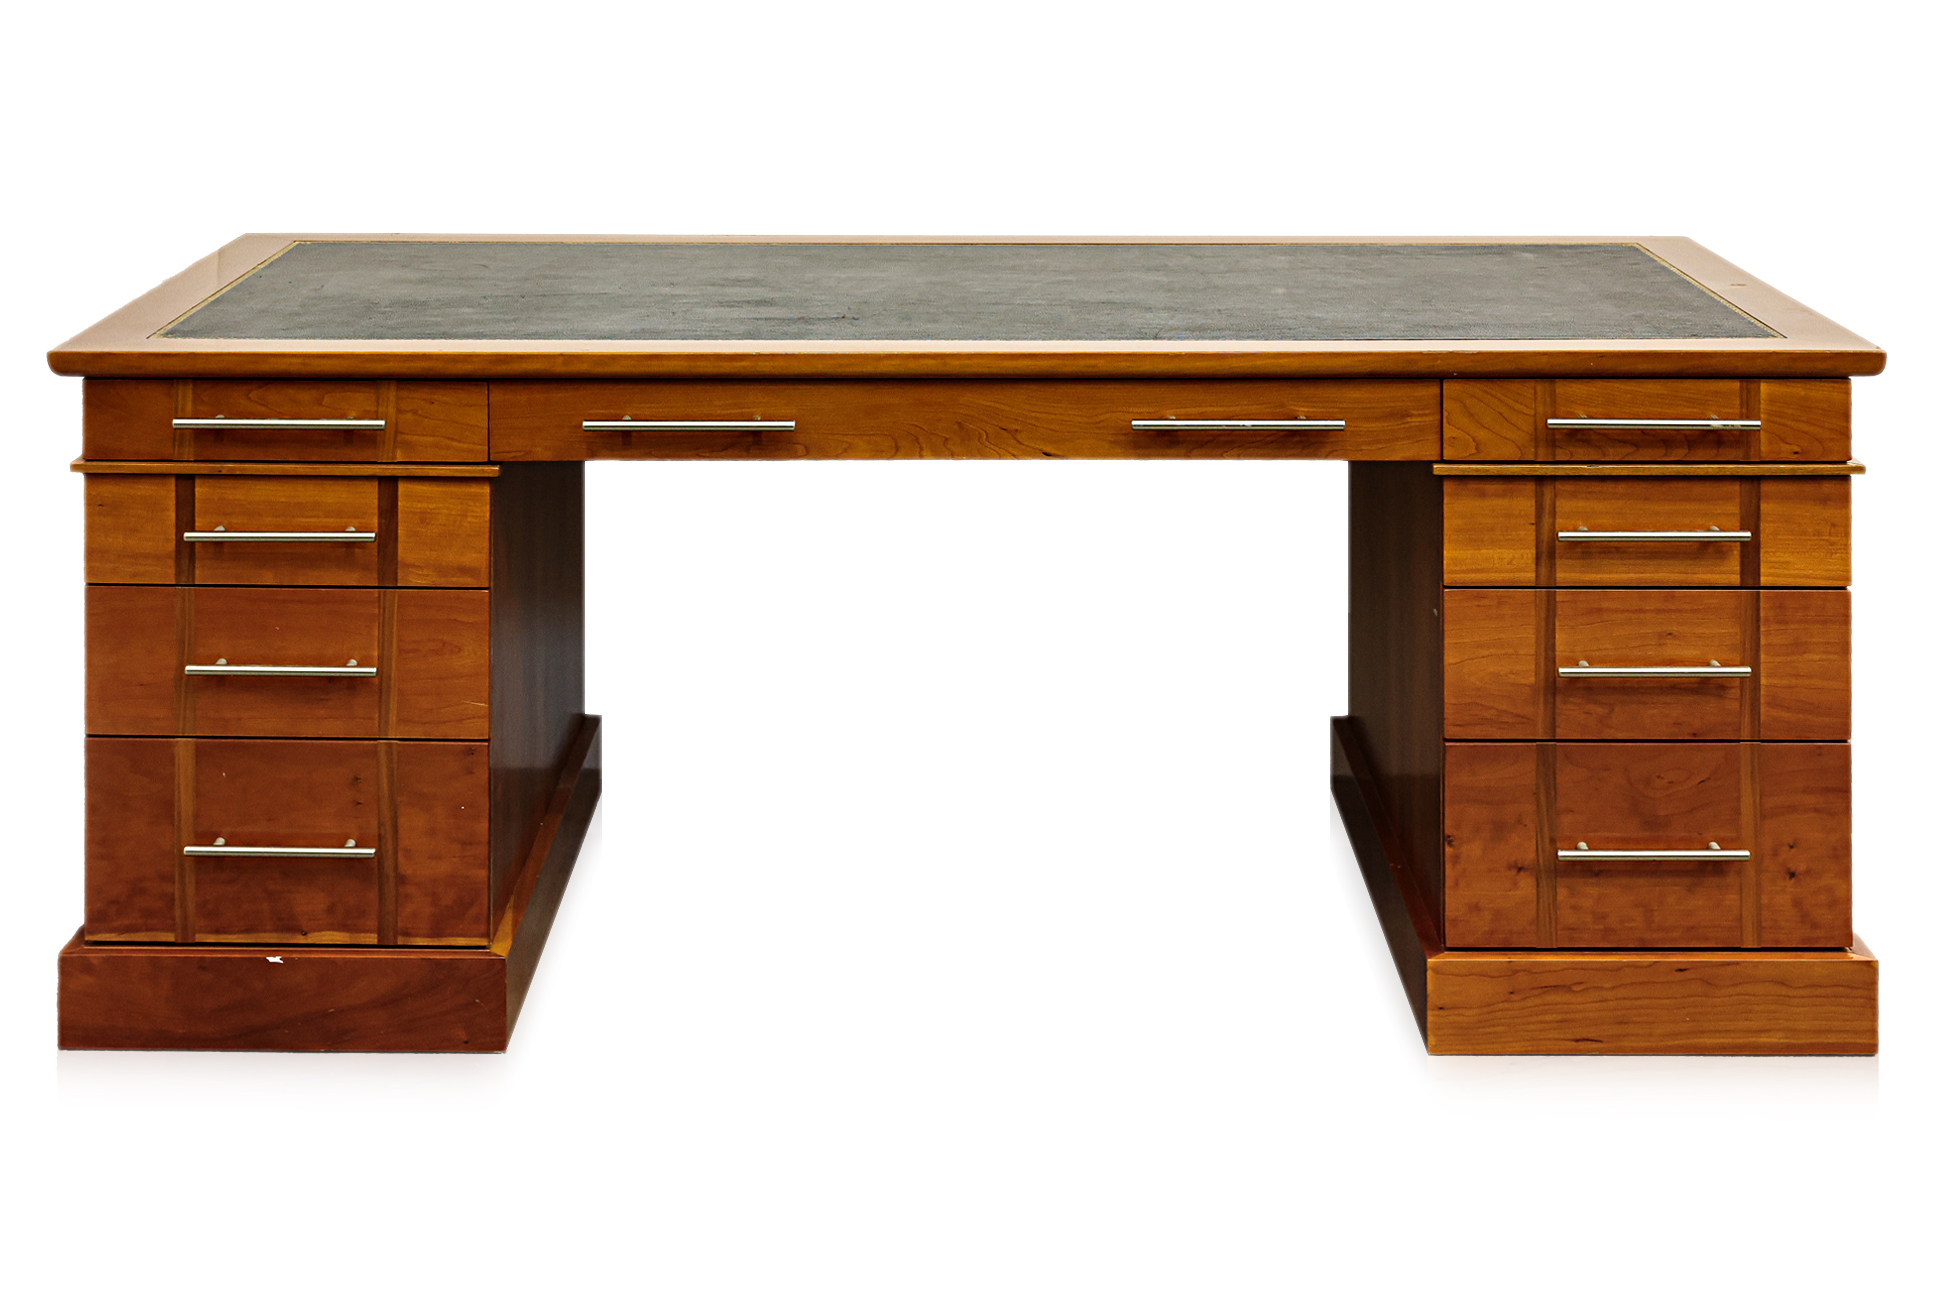 A CONTEMPORARY TWIN PEDESTAL DESK BY DUFF TISDALL, DUBLIN - Image 2 of 4